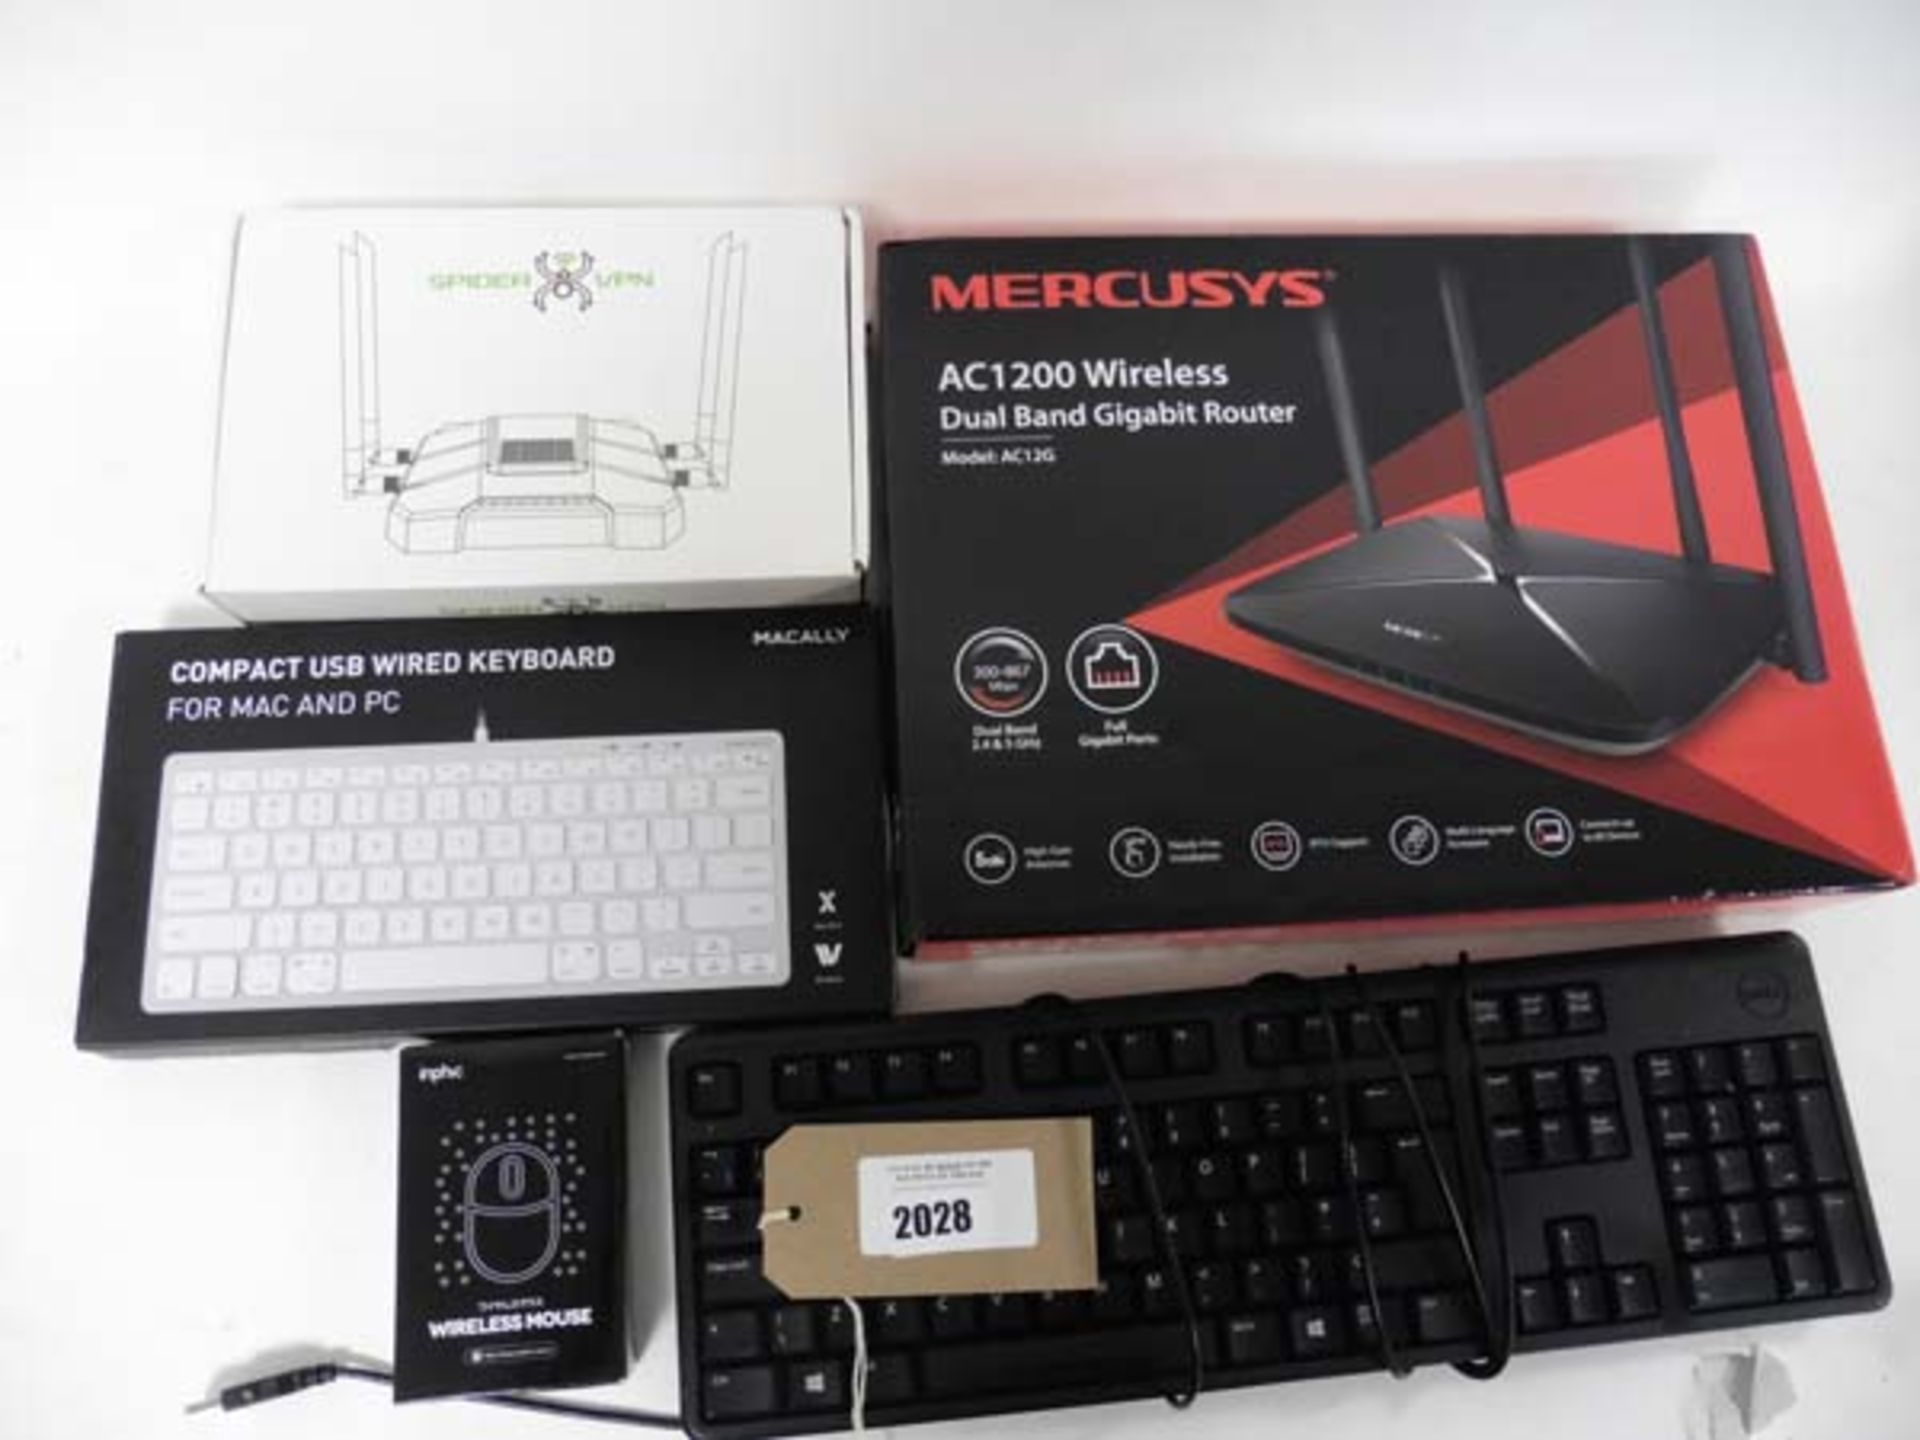 Macally Compact USB keyboard for Mac & PC, Dell keyboard, wireless mouse, Spider VPN & Mercusys